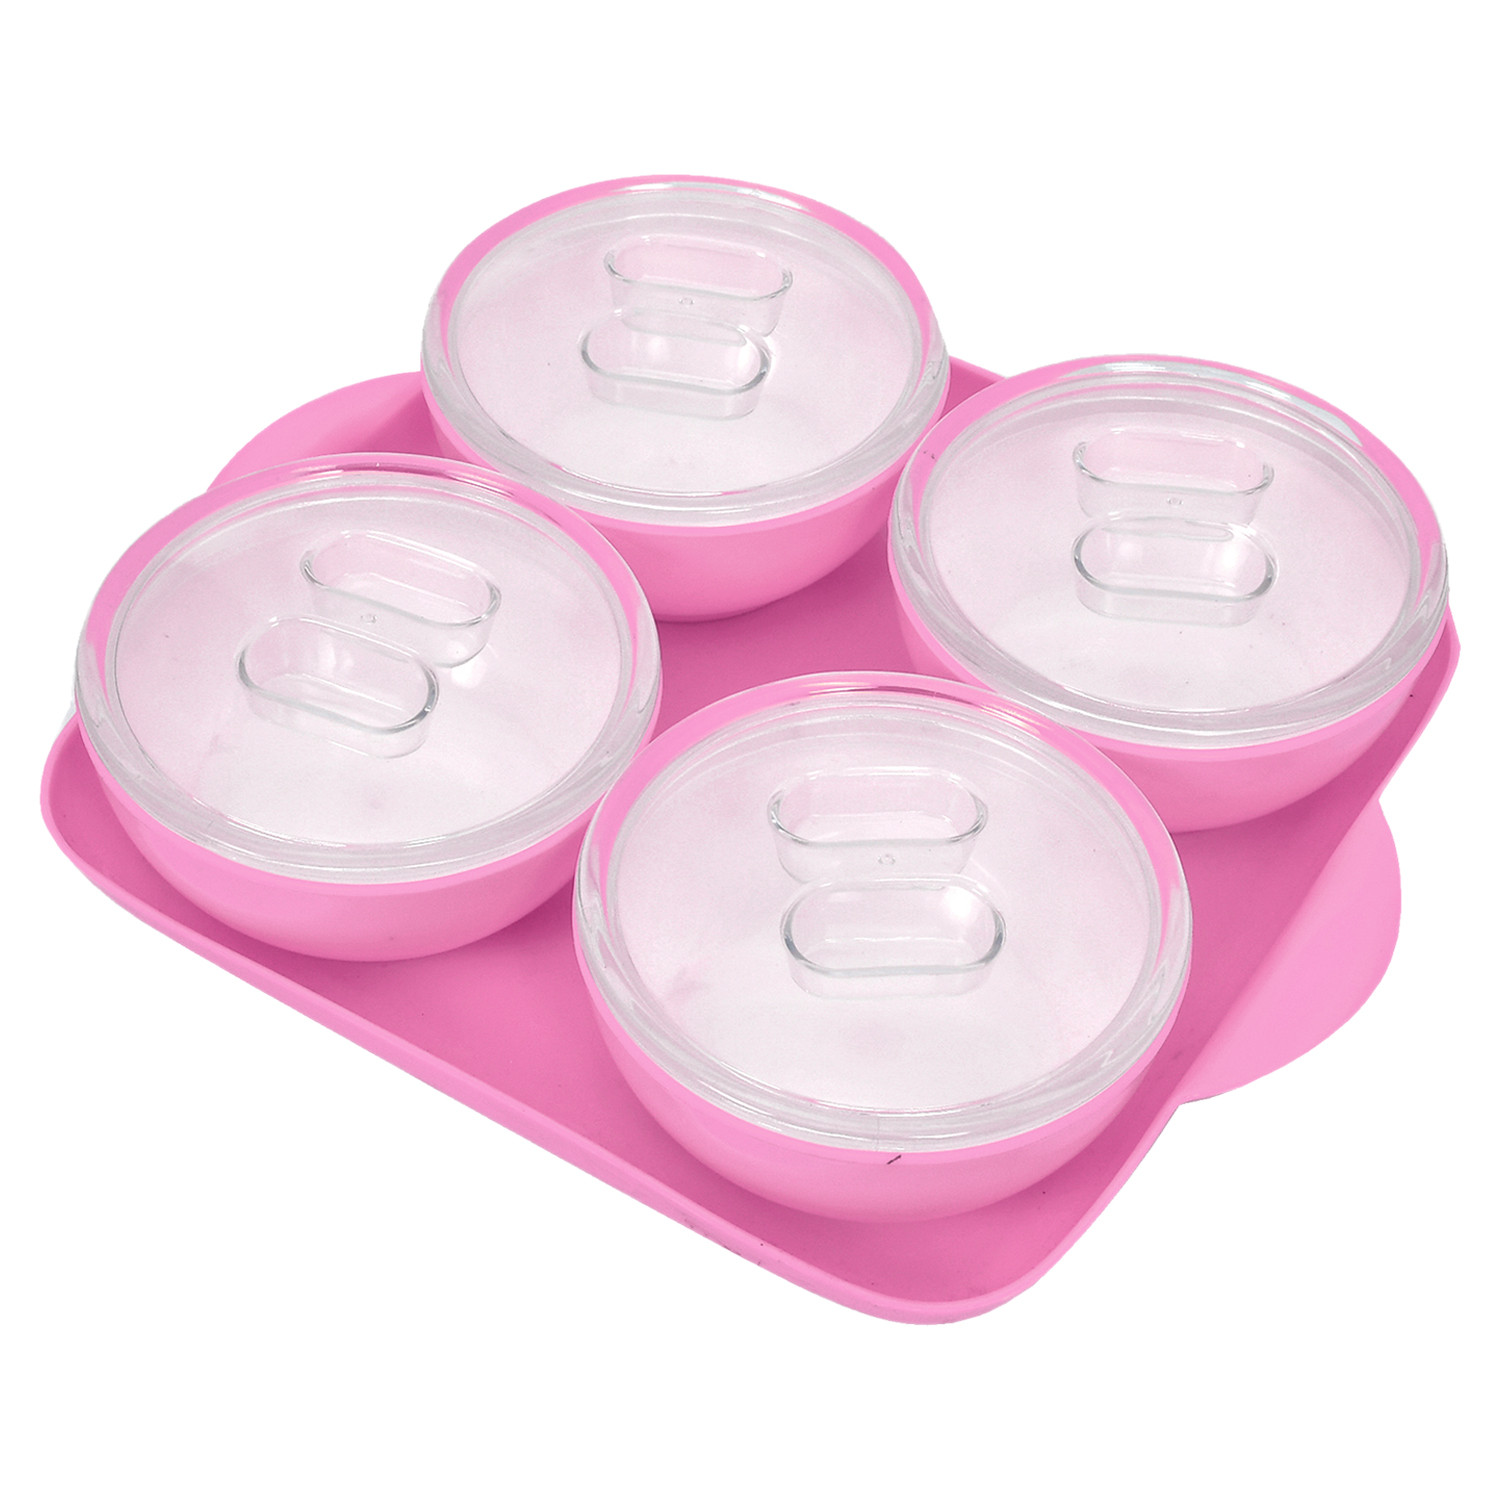 Kuber Industries Plastic 4 Bowls & 1 Square Tray Set For Serving & Store Dry Fruits, candies, Snacks With Silicon Rubberized Ring Lid (Pink)